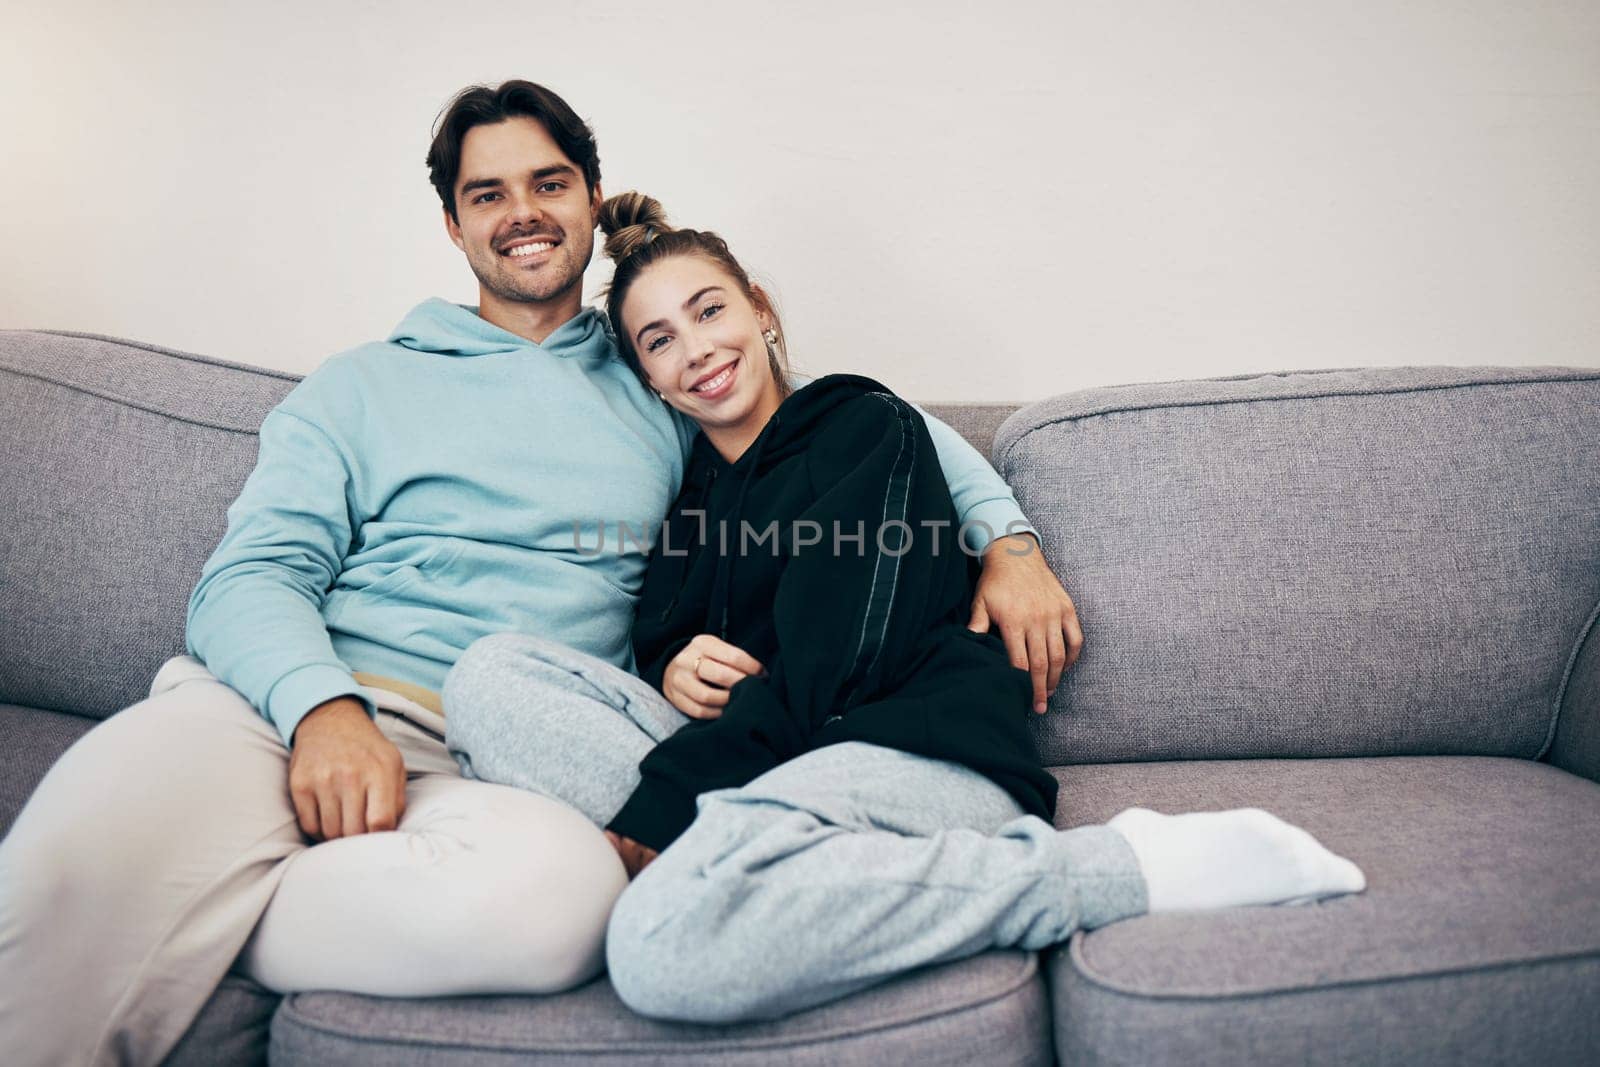 Portrait, relax and smile with a couple on a sofa in the living room of their home together for bonding. Love, hug or date with a happy man and woman in their apartment for romance or relationship.